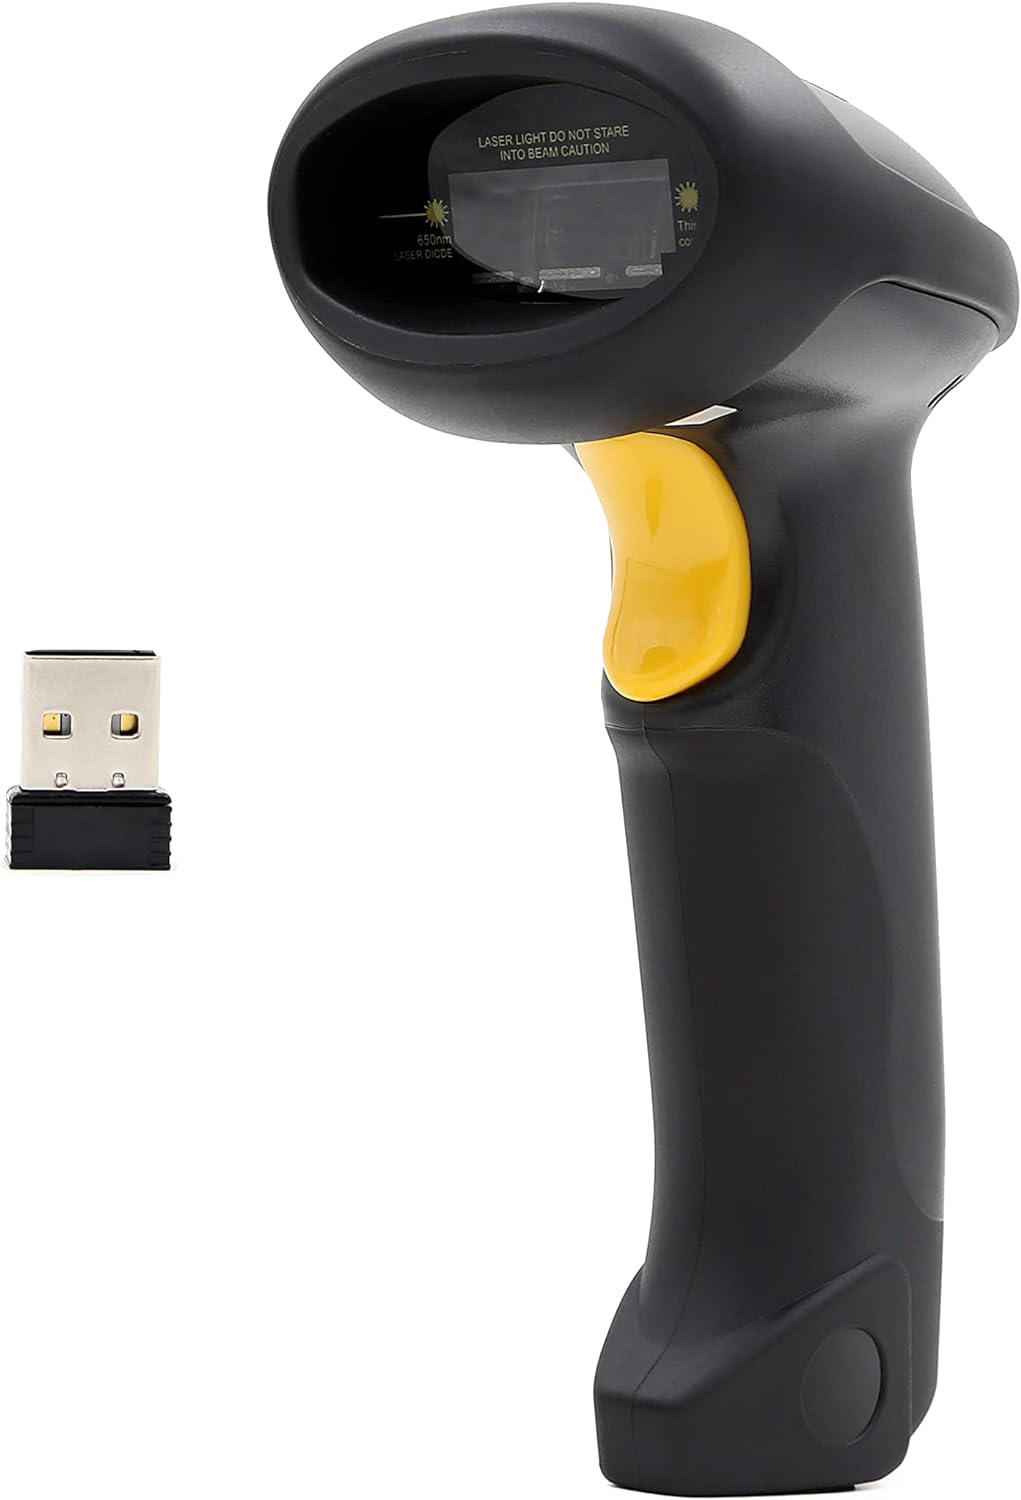 TEEMI TMCT-07 Wireless Barcode Scanner with Stand, Versatile 2-in-1 (2.4Ghz Wireless+USB 2.0 Wired) Handheld Automatic 1D Laser Rechargeable Bar Code Reader